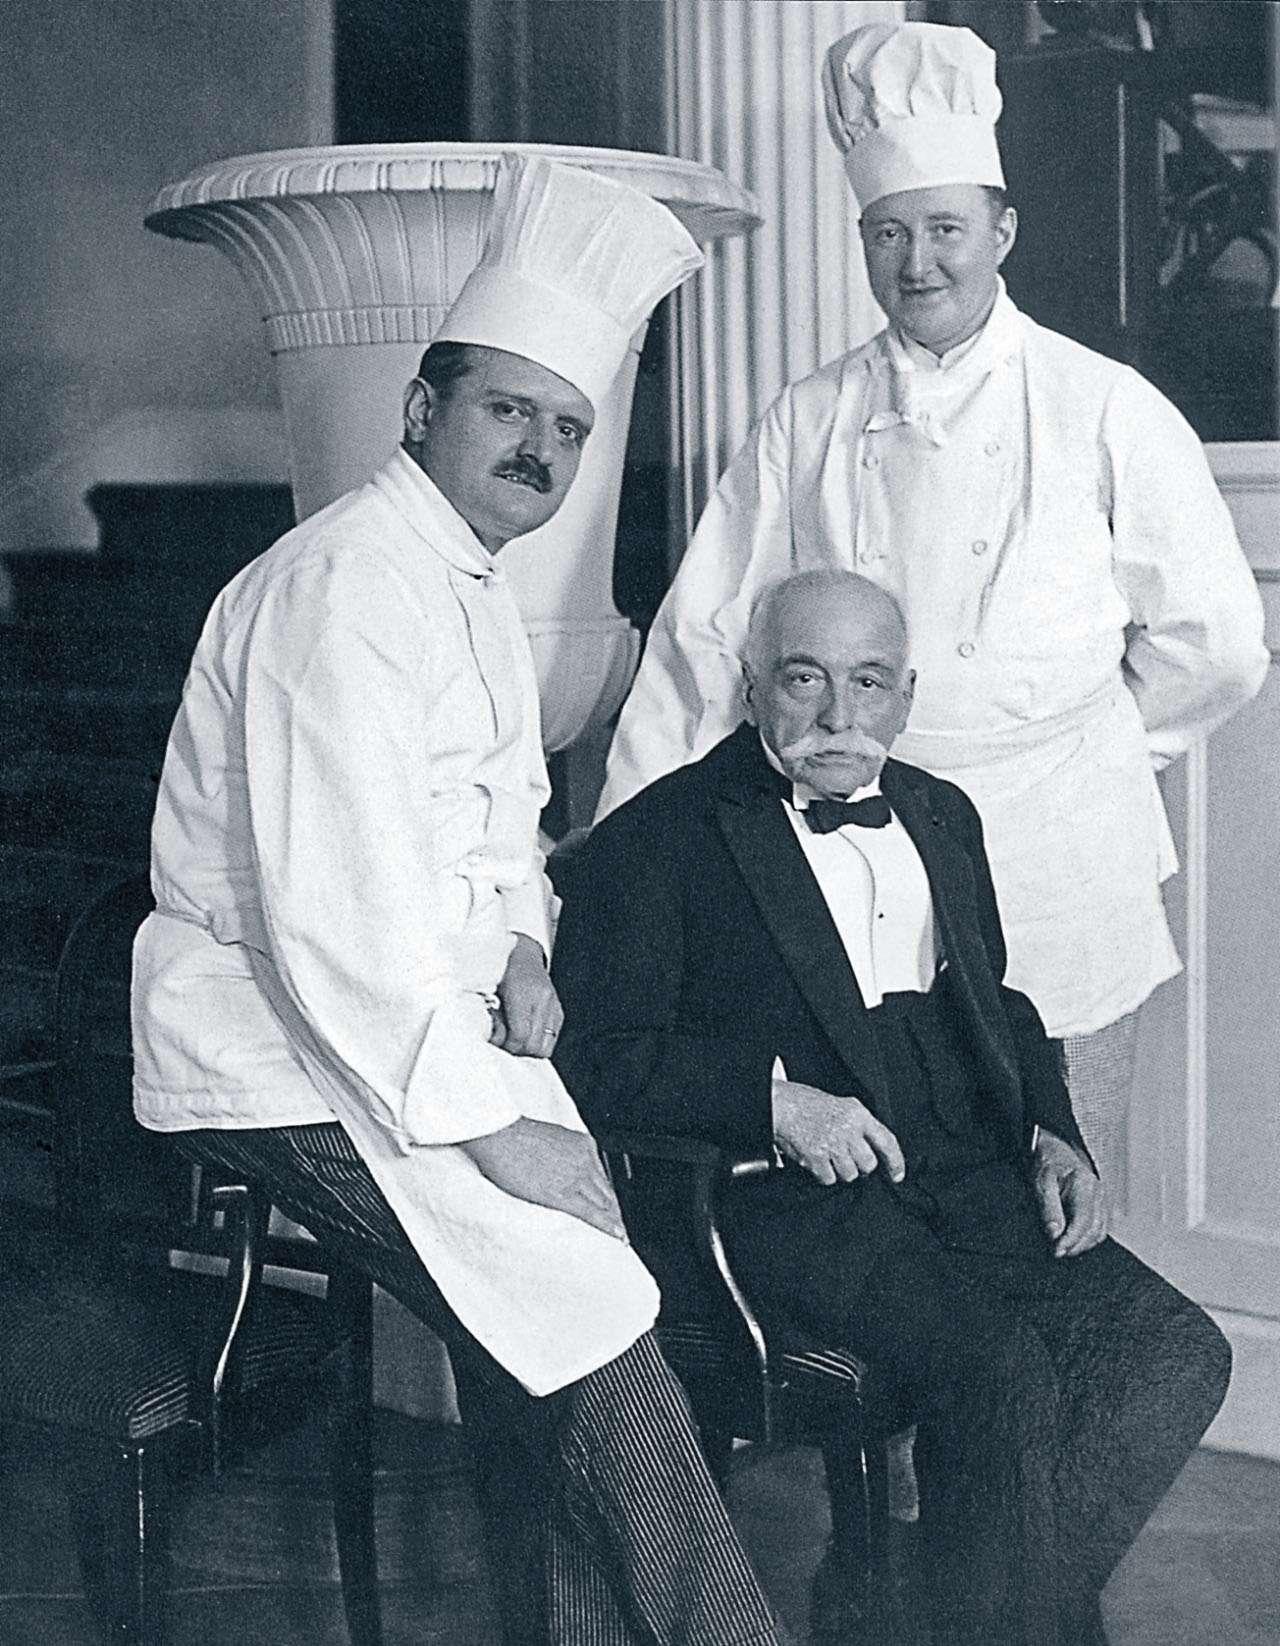 Auguste Escoffier in Hotel Baur au Lac in Zürich in 1830 with two of his students.